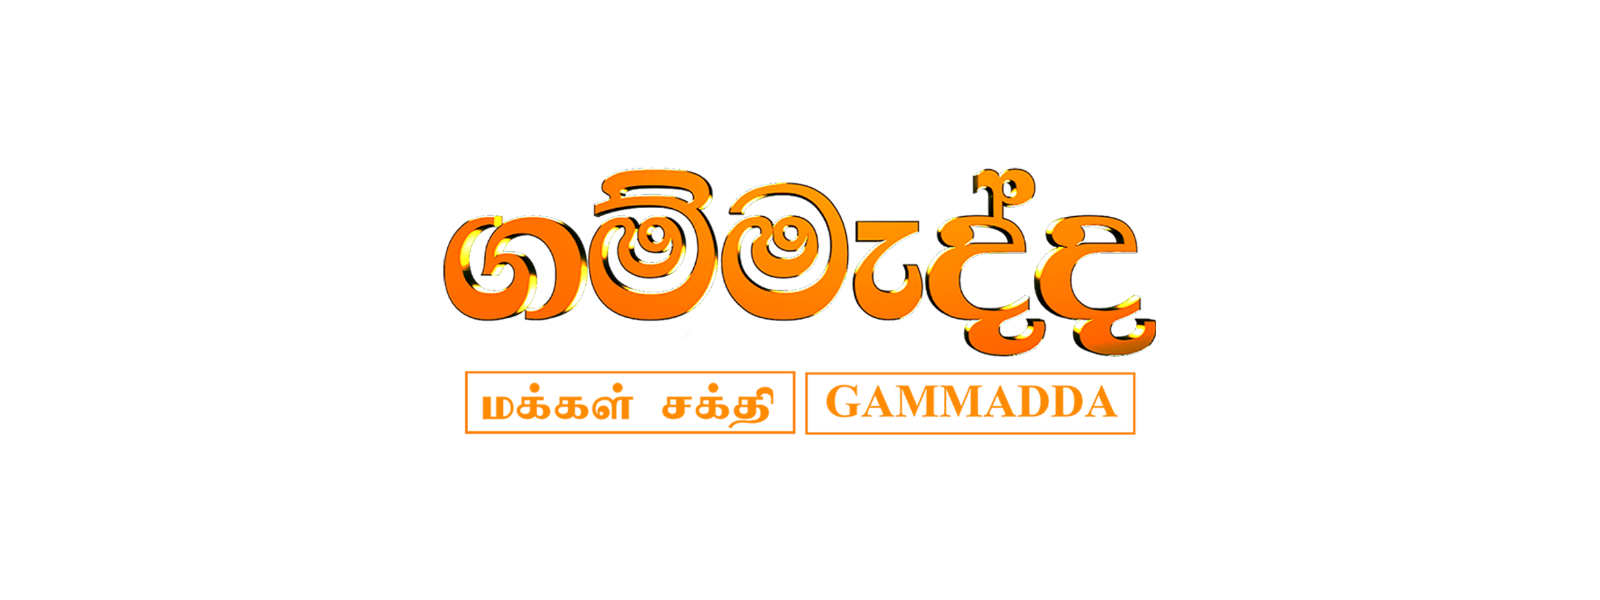 Gammadda offers hope for a homeless family